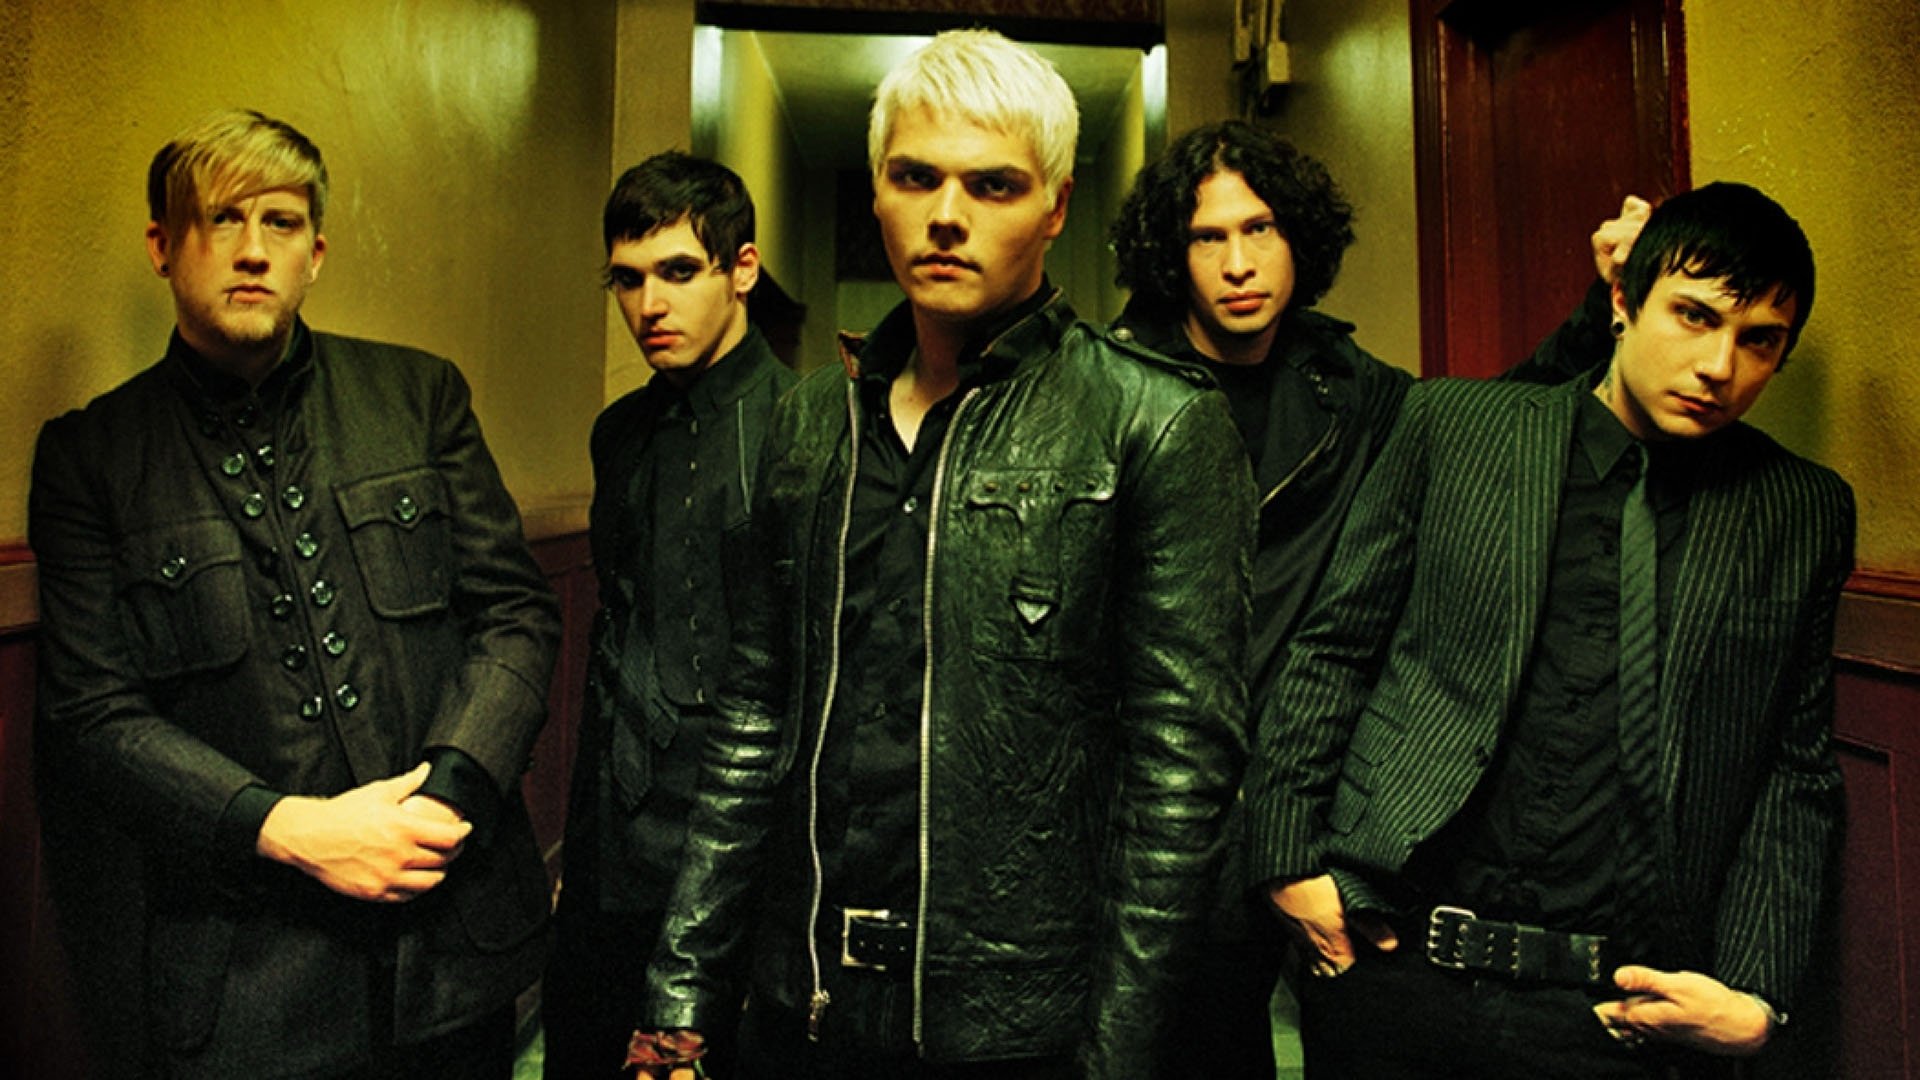 Wallpaper My Chemical Romance  My chemical romance wallpaper My chemical  romance Emo wallpaper